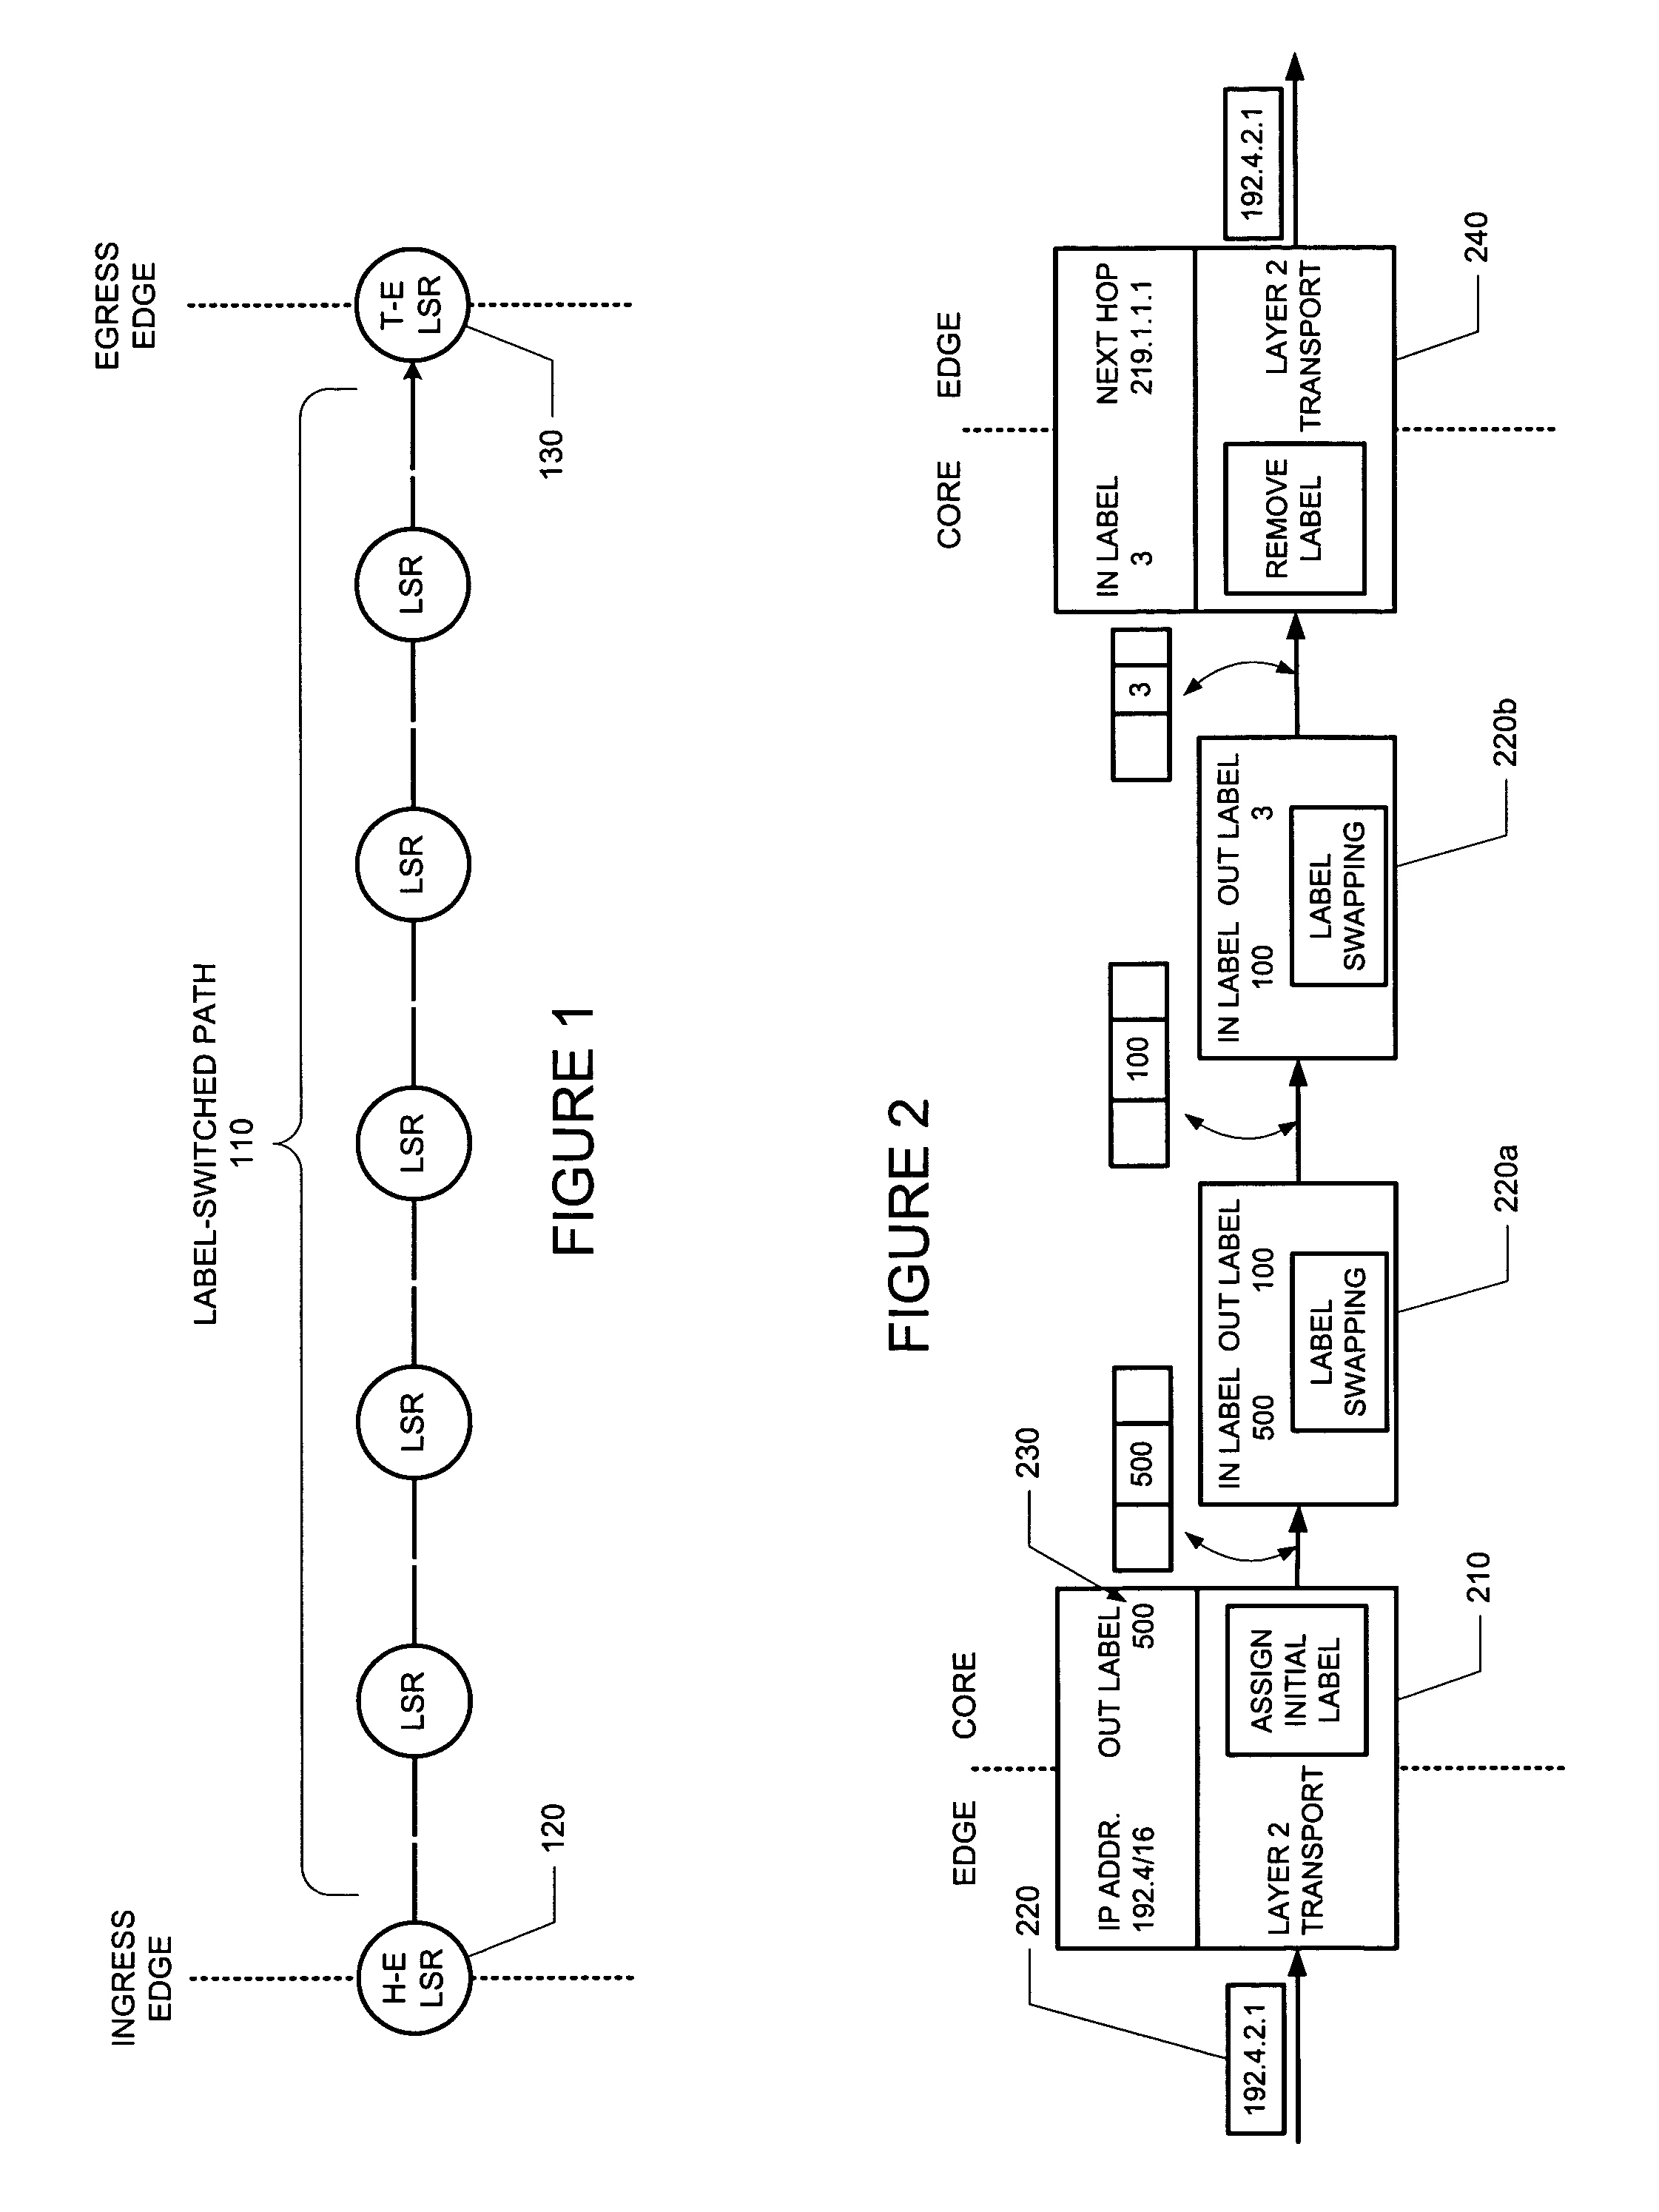 Controlling the signaling of label-switched paths using a label distribution protocol employing messages which facilitate the use of external prefixes